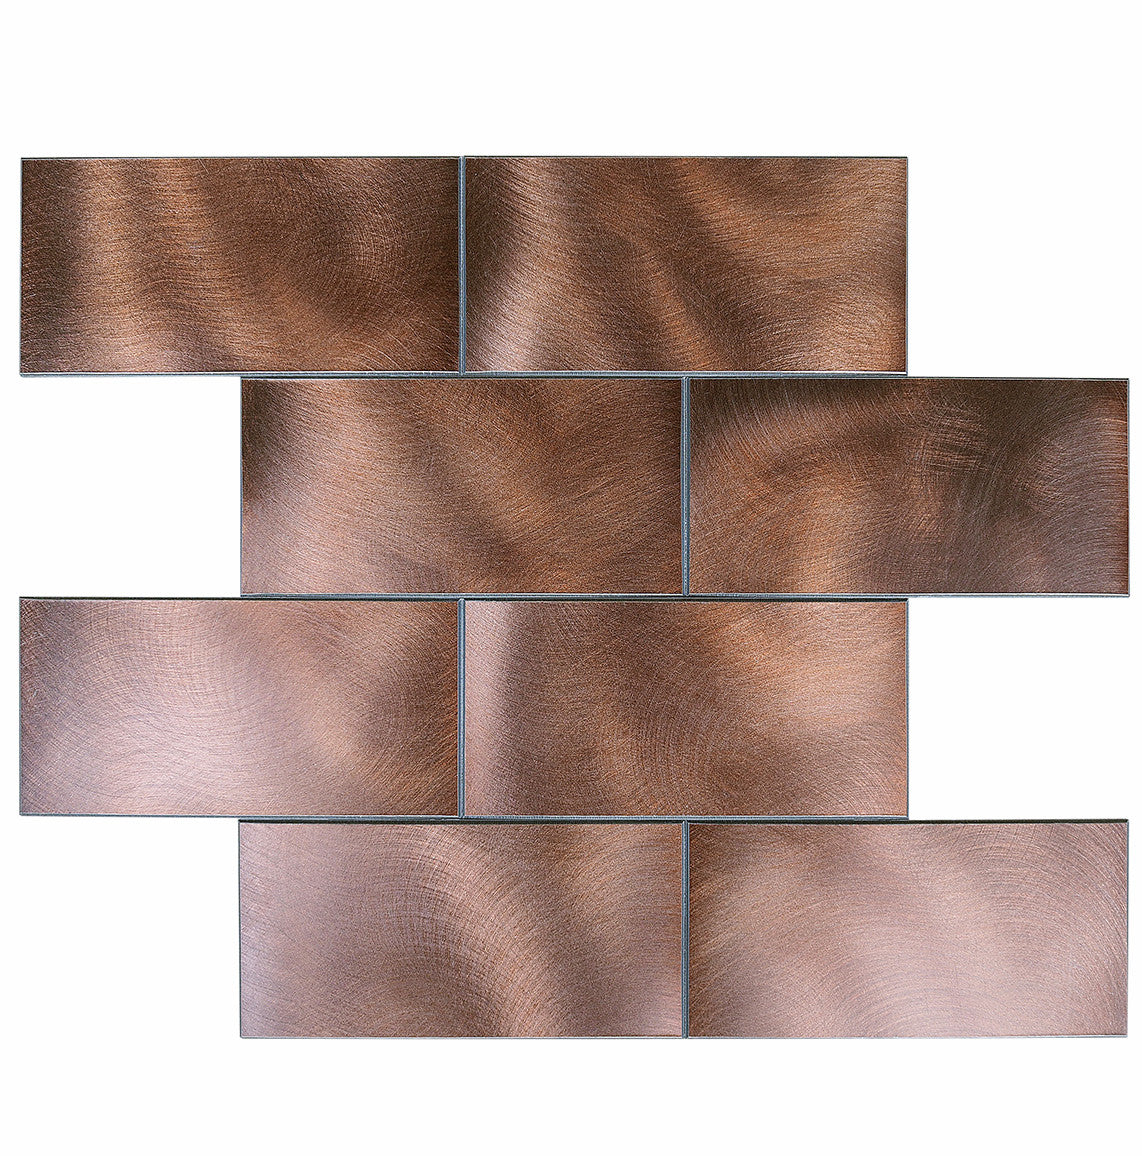 Decopsu Peel and Stick Metal Subway Tile Backsplash (Rotary Abrased 15in x 12in 1.6in Thick) for Kitchen Bathroom Wall Accent (5pc/Pack, RT Dark Brown)